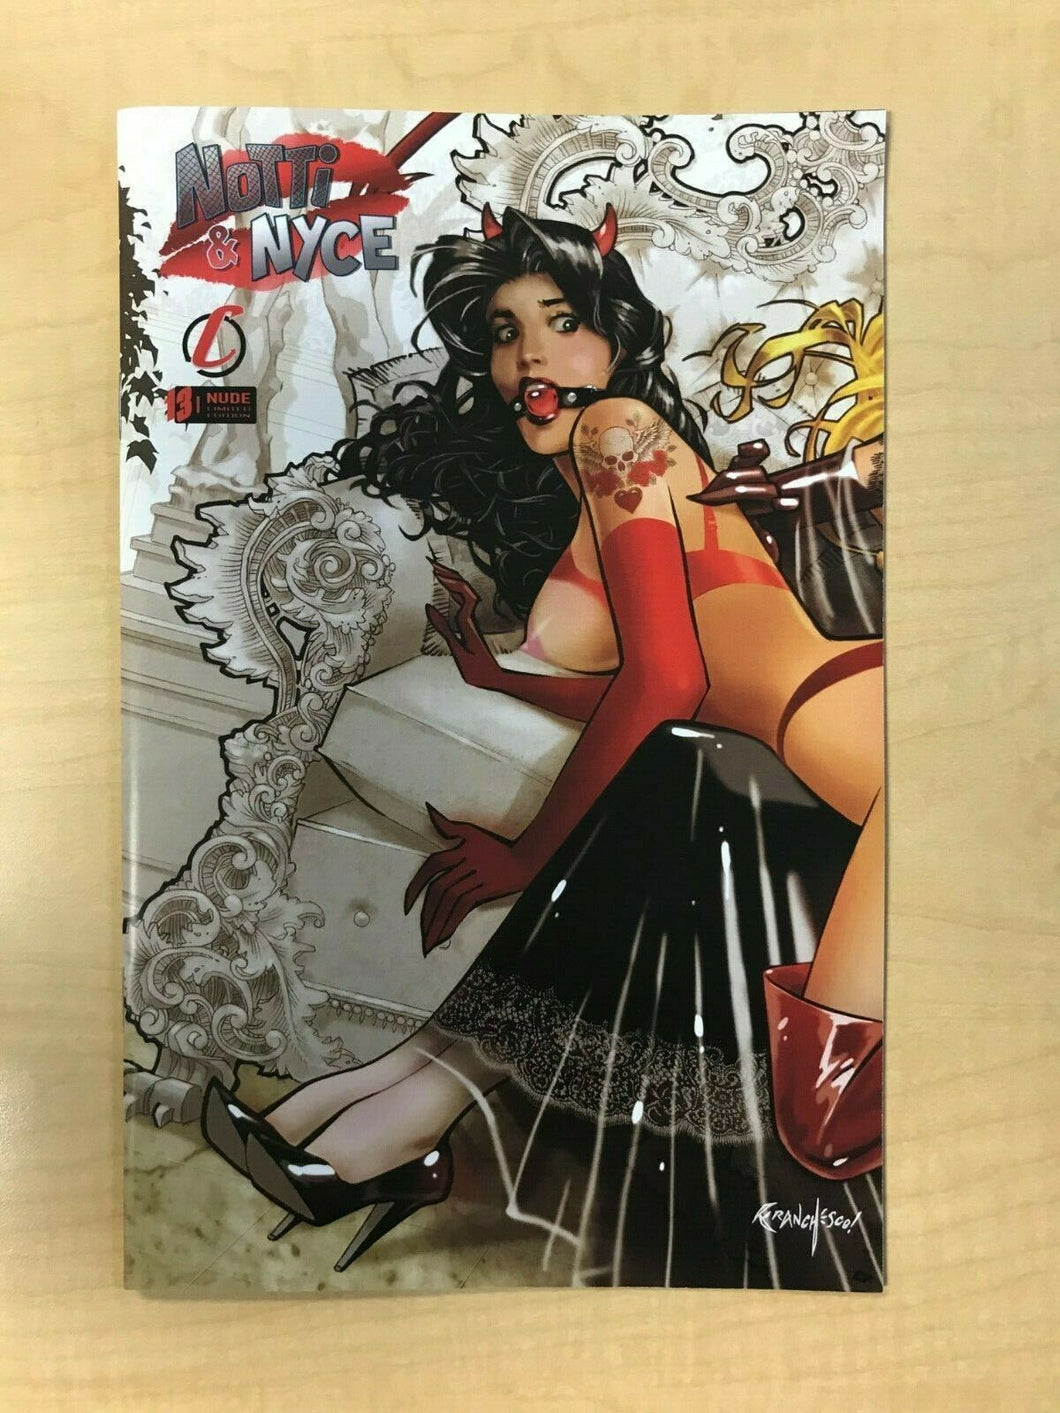 Notti & Nyce #13 A Franchesco NAUGHTY TOPLESS Variant Cover Counterpoint Comics